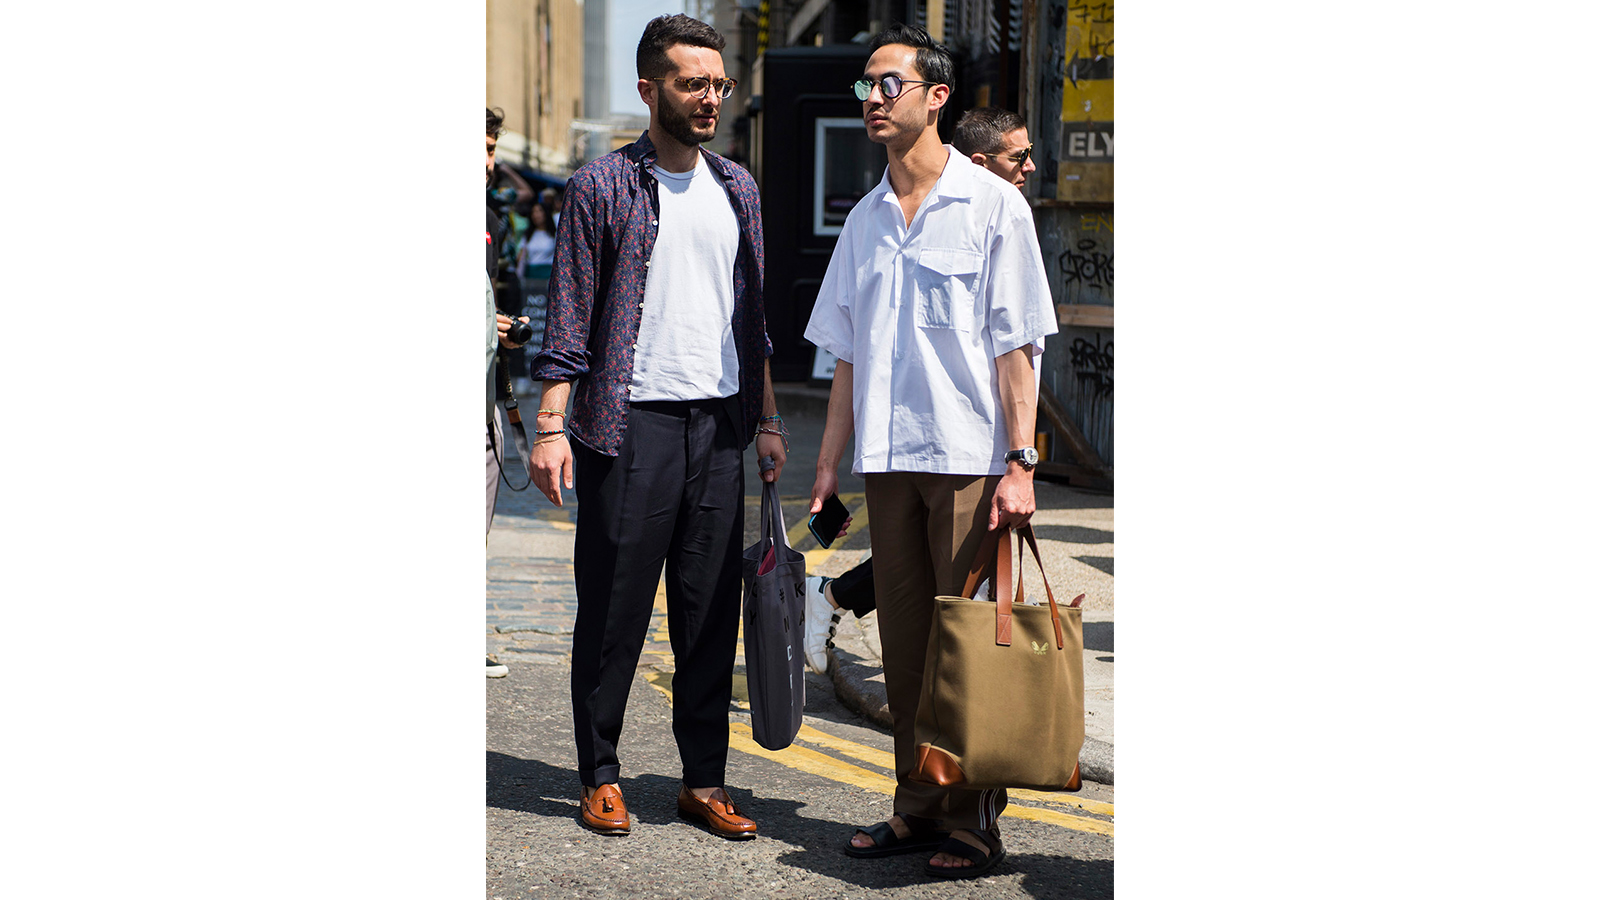 7 style tips for tall men - approach patterns with caution